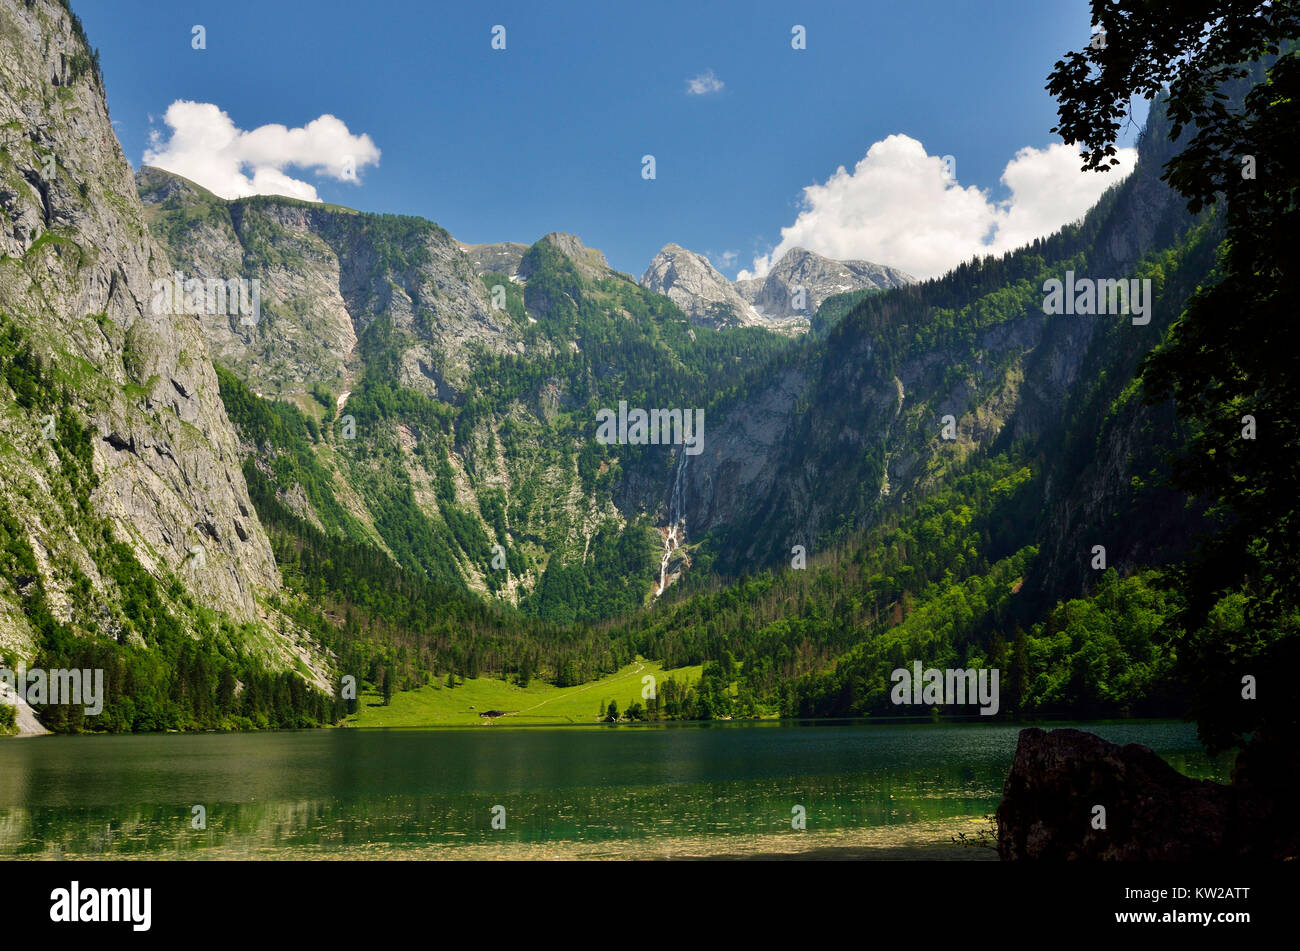 Berchtesgadener country, upper lake, rock kettle of the R?thwand and summits of the Hagengebirges, Berchtesgadener Land, Obersee, Felskessel der Röthw Stock Photo